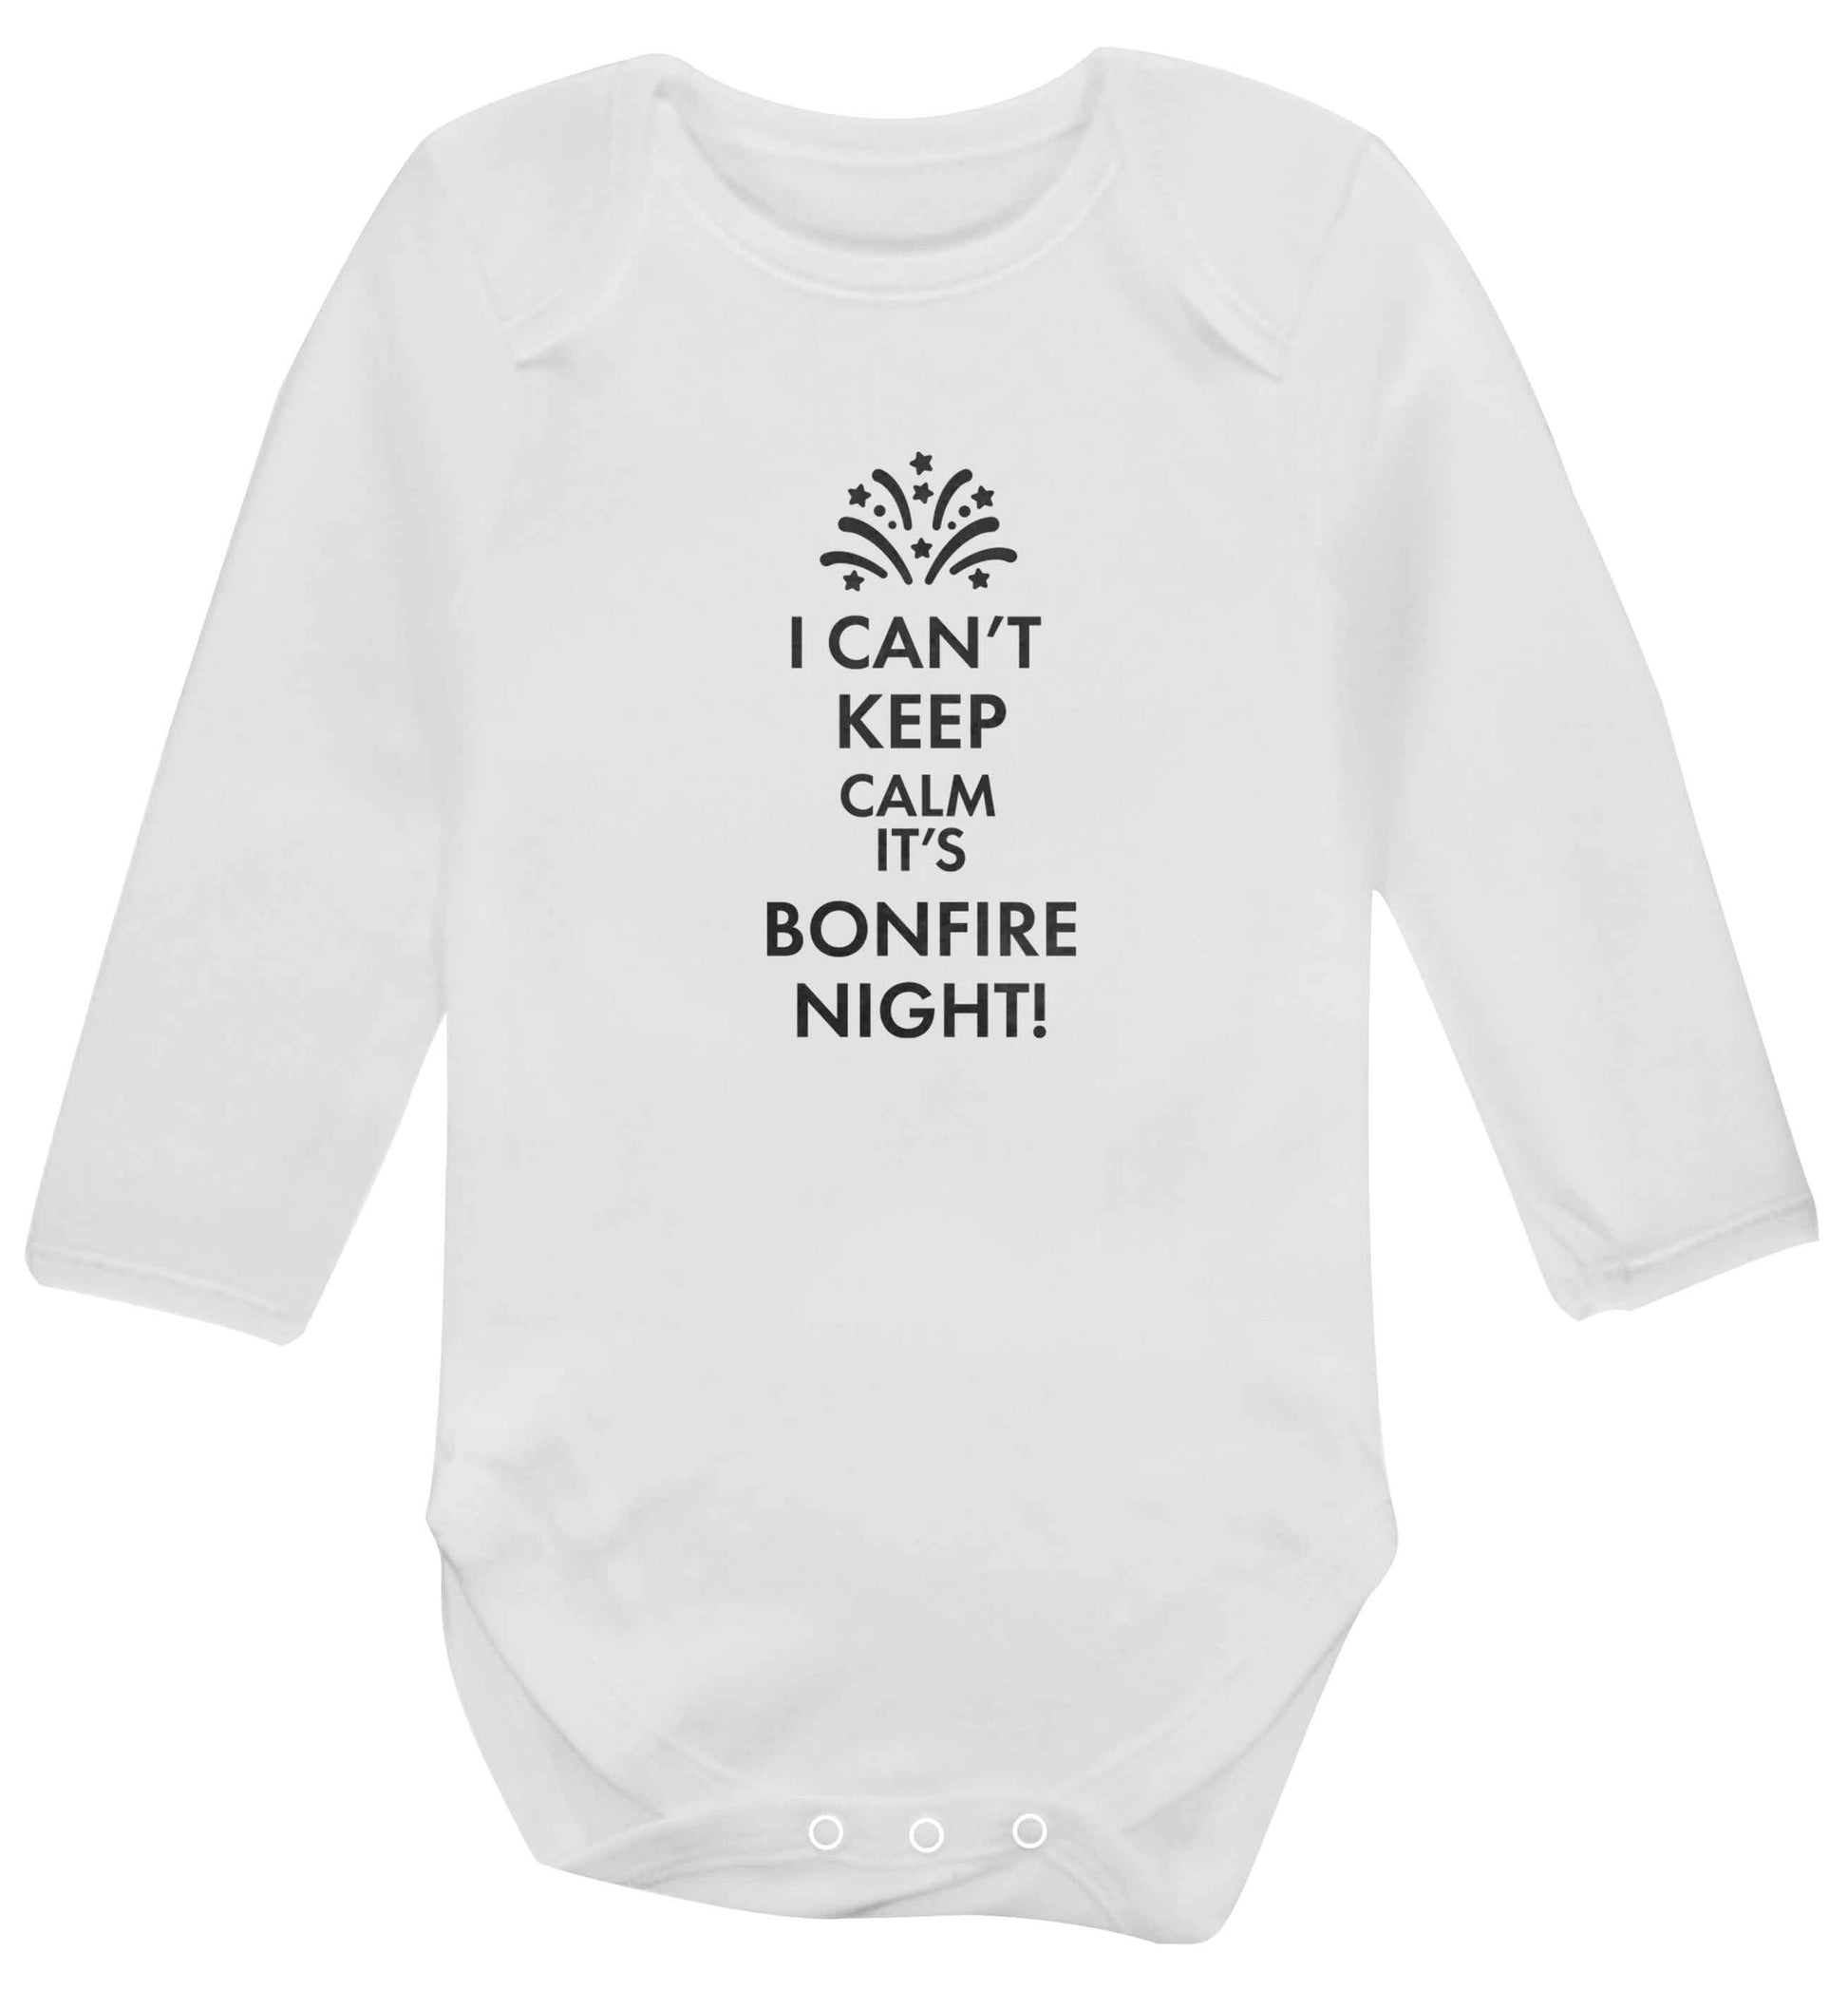 I can't keep calm its bonfire night baby vest long sleeved white 6-12 months